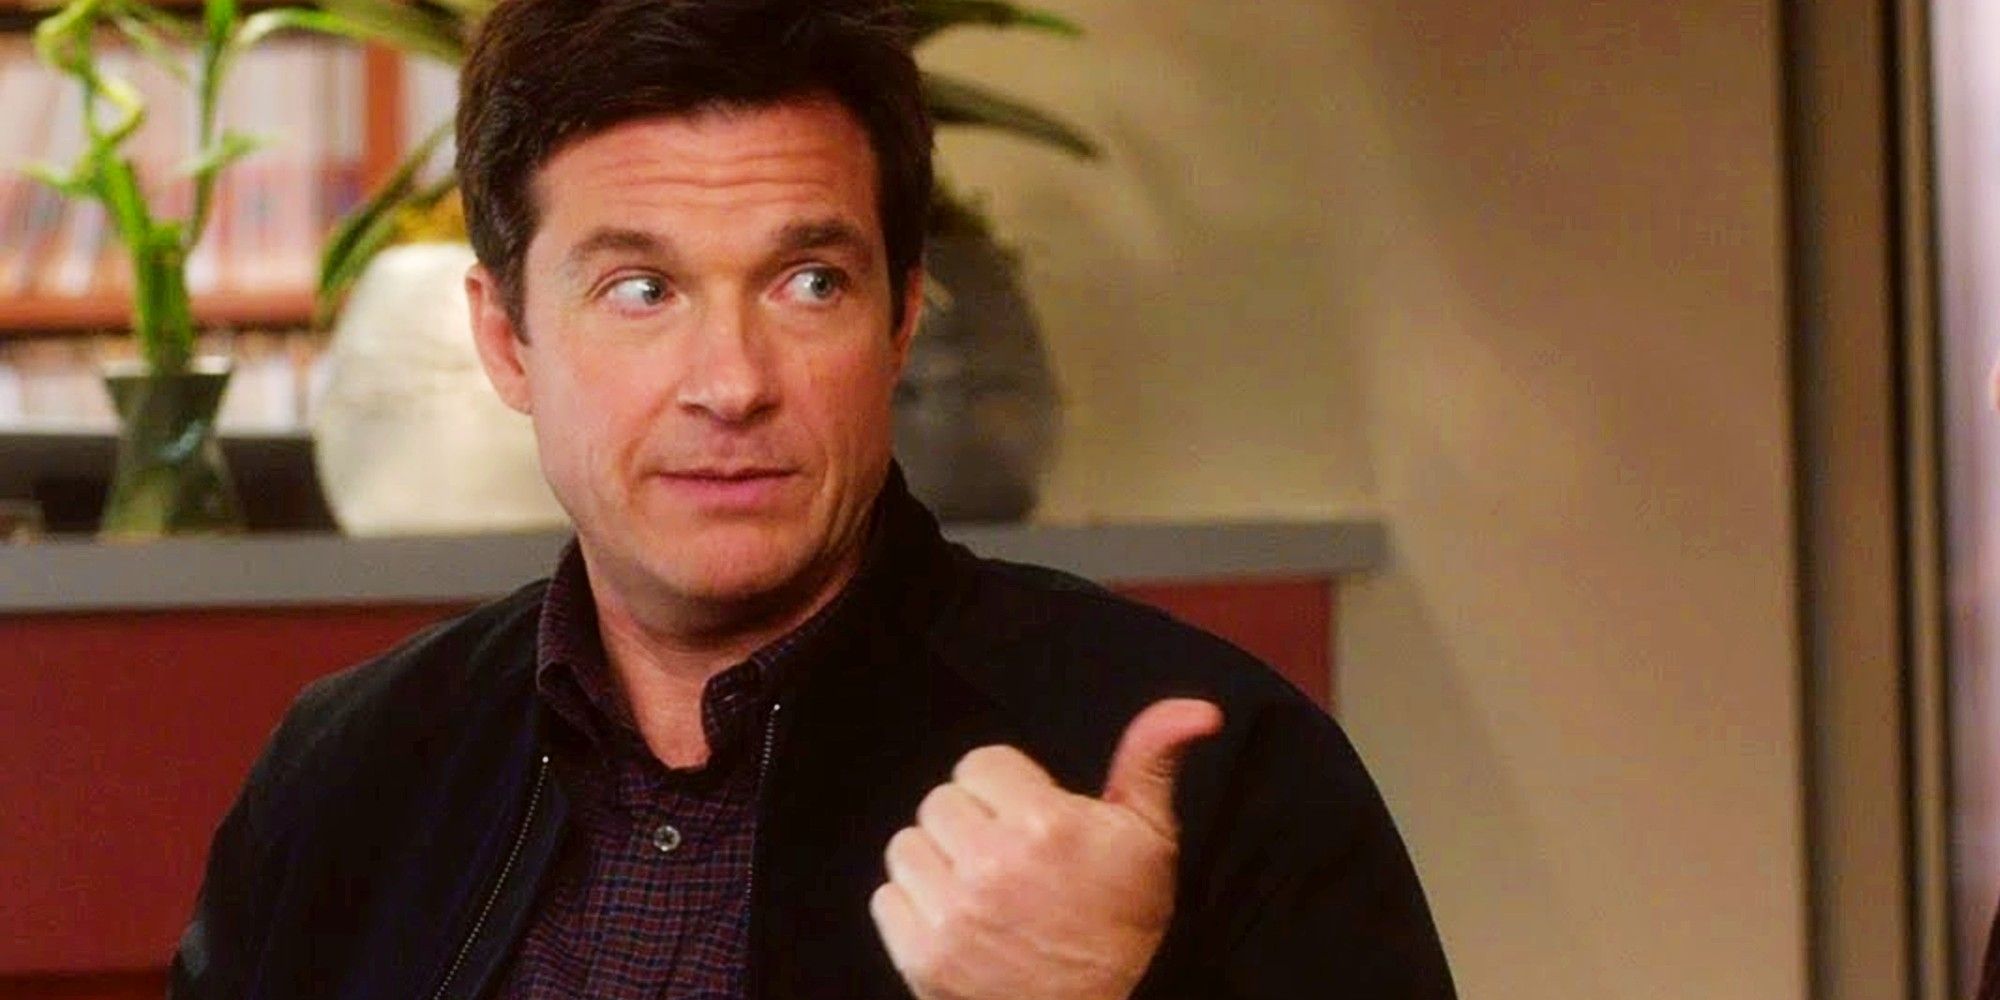 Jason Bateman giving a thumbs-up while looking off to the side in Horrible Bosses 2